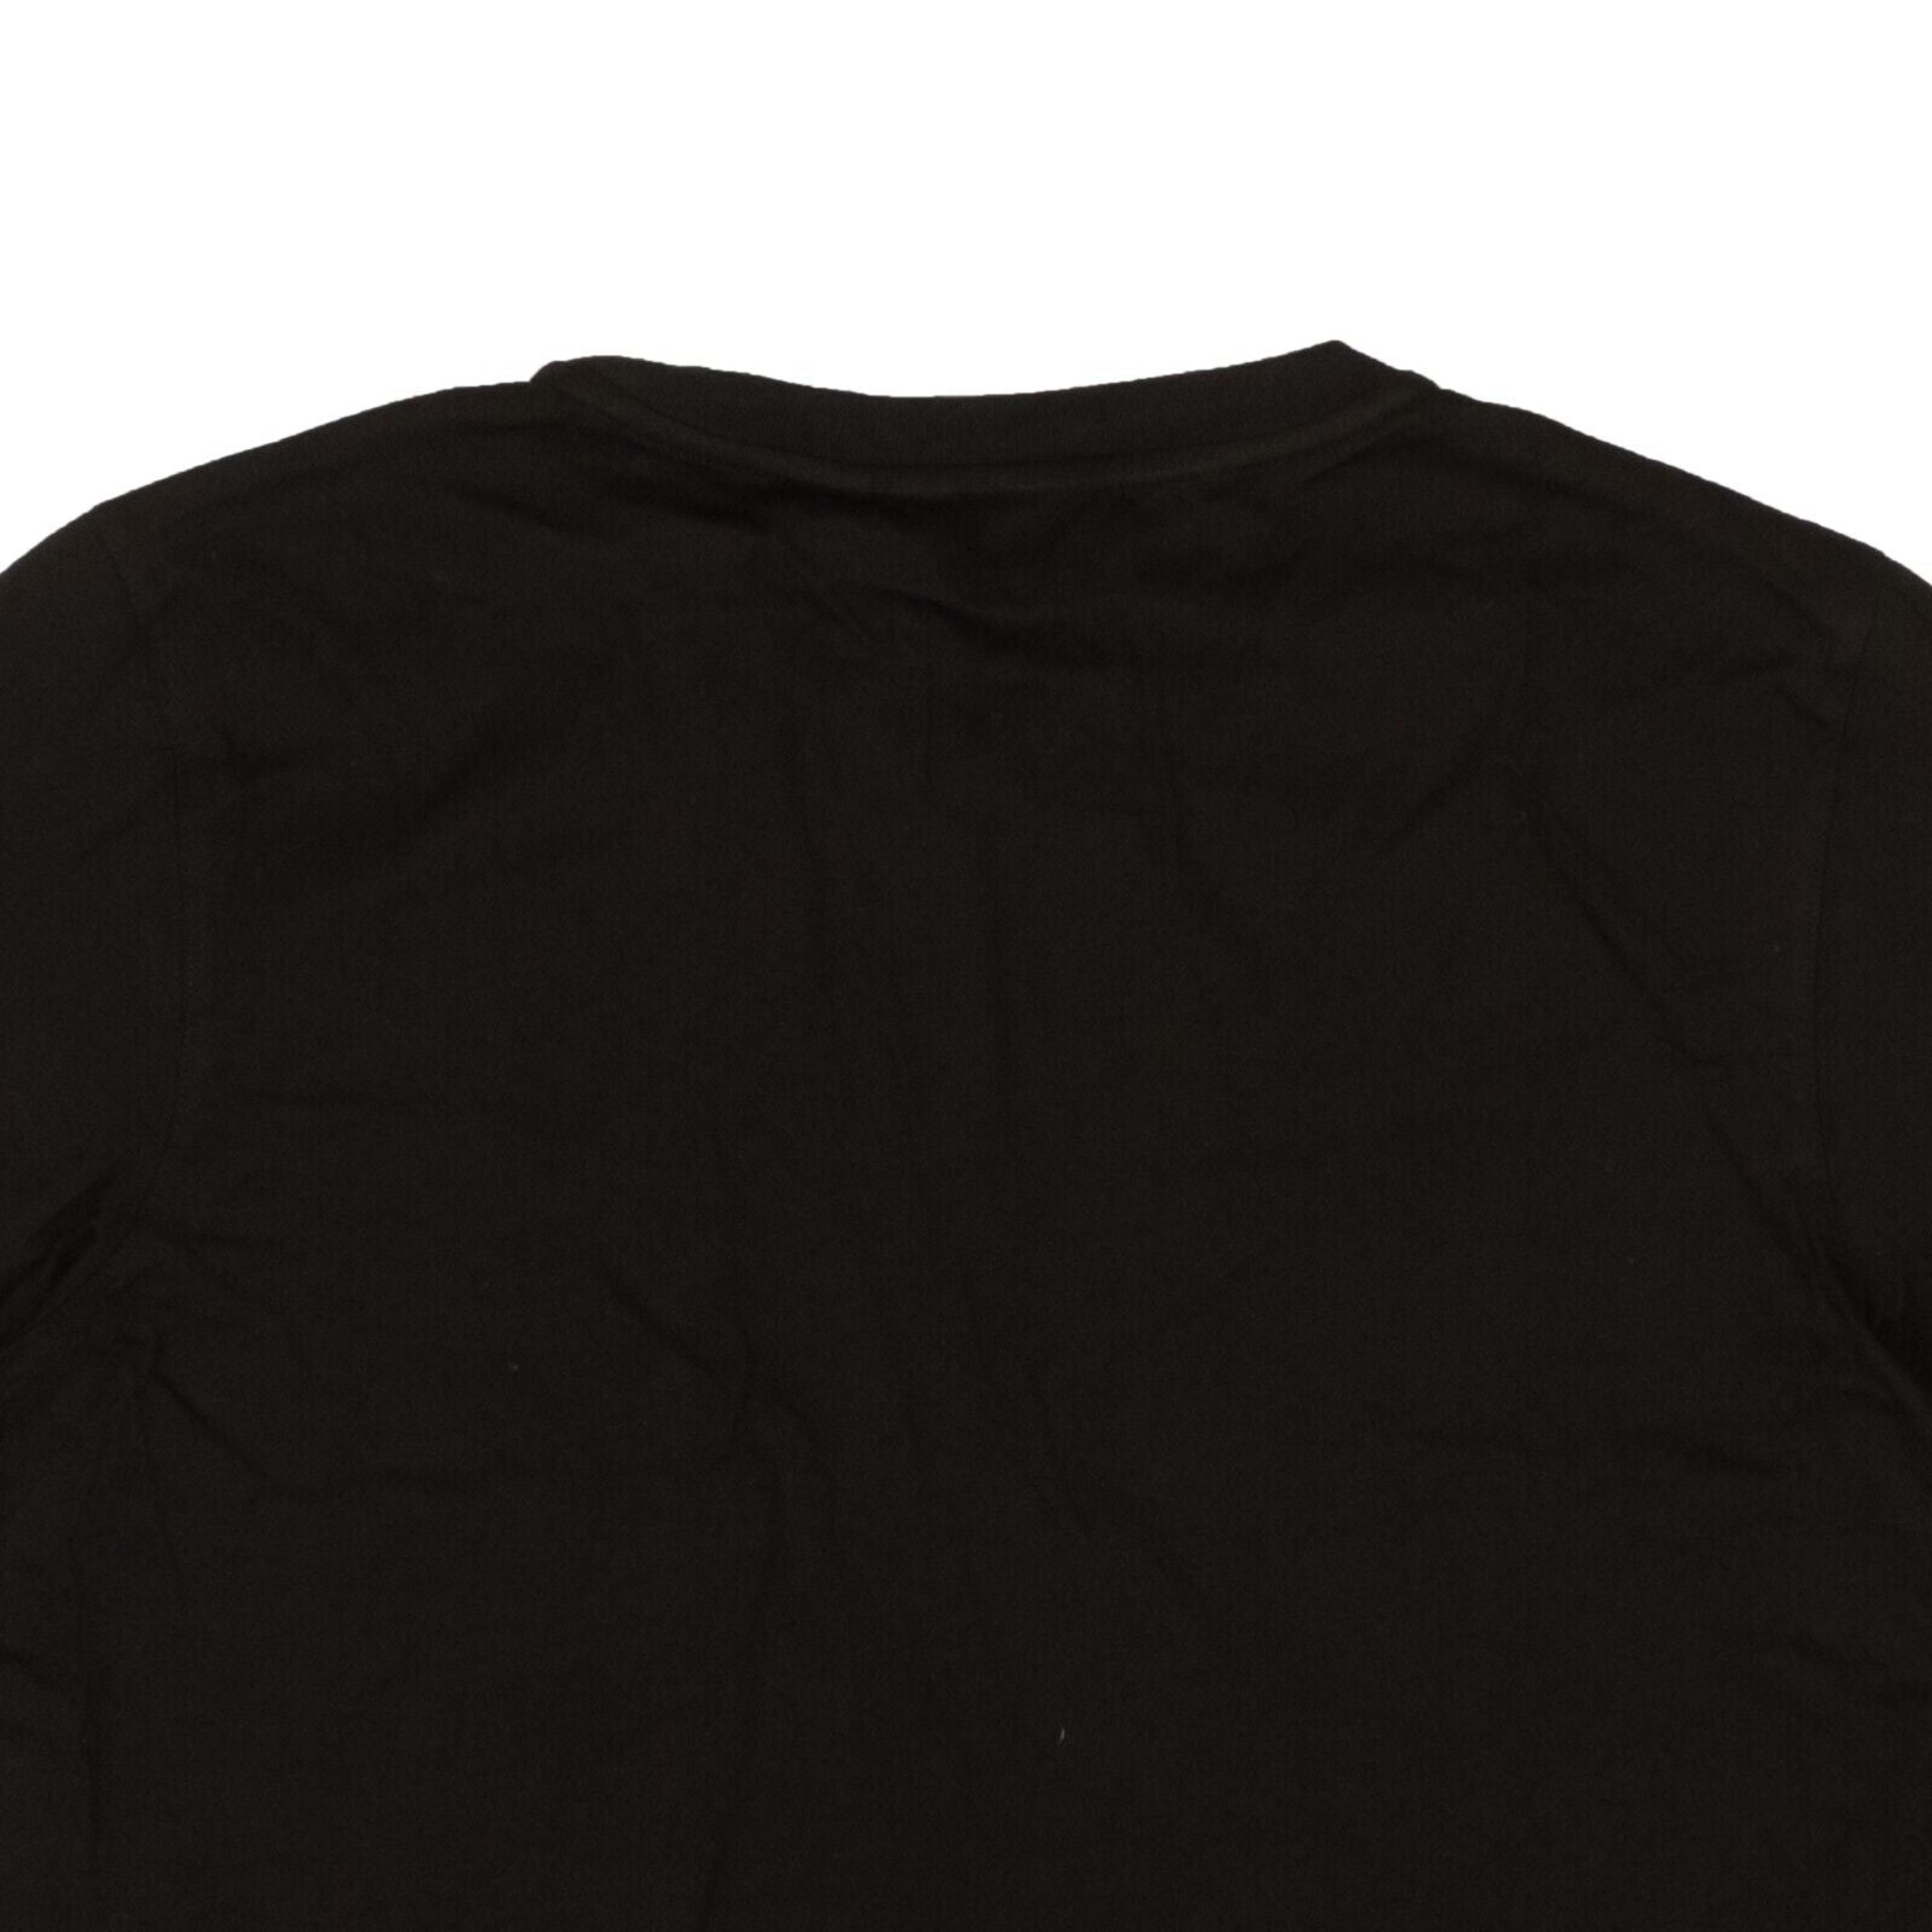 Alternate View 3 of Opening Ceremony Blank Oc Cropped T-Shirt - Black